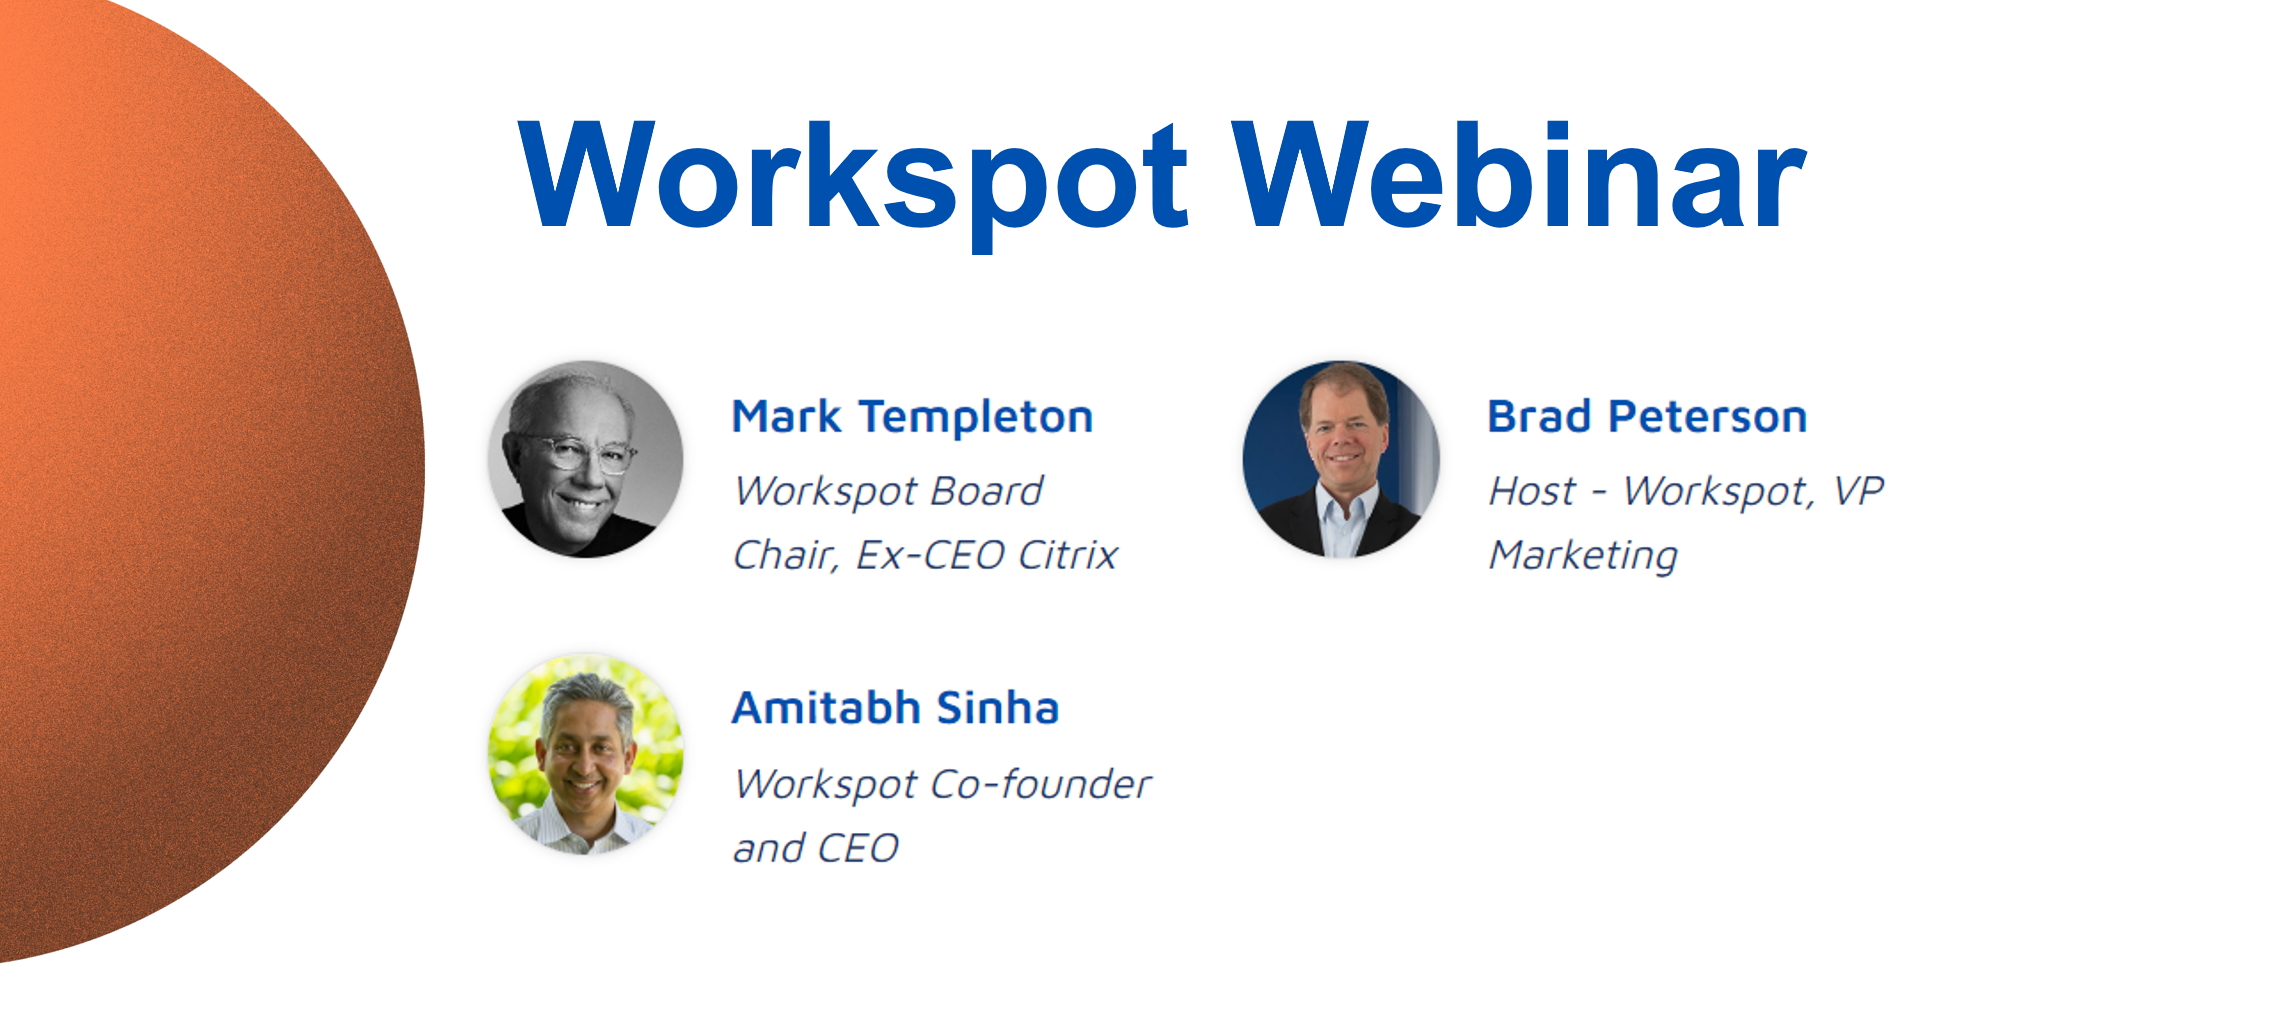 Join Mark Templeton, Amitabh Sinha, and Brad Peterson for Modernizing VDI in 45 days (or less!)